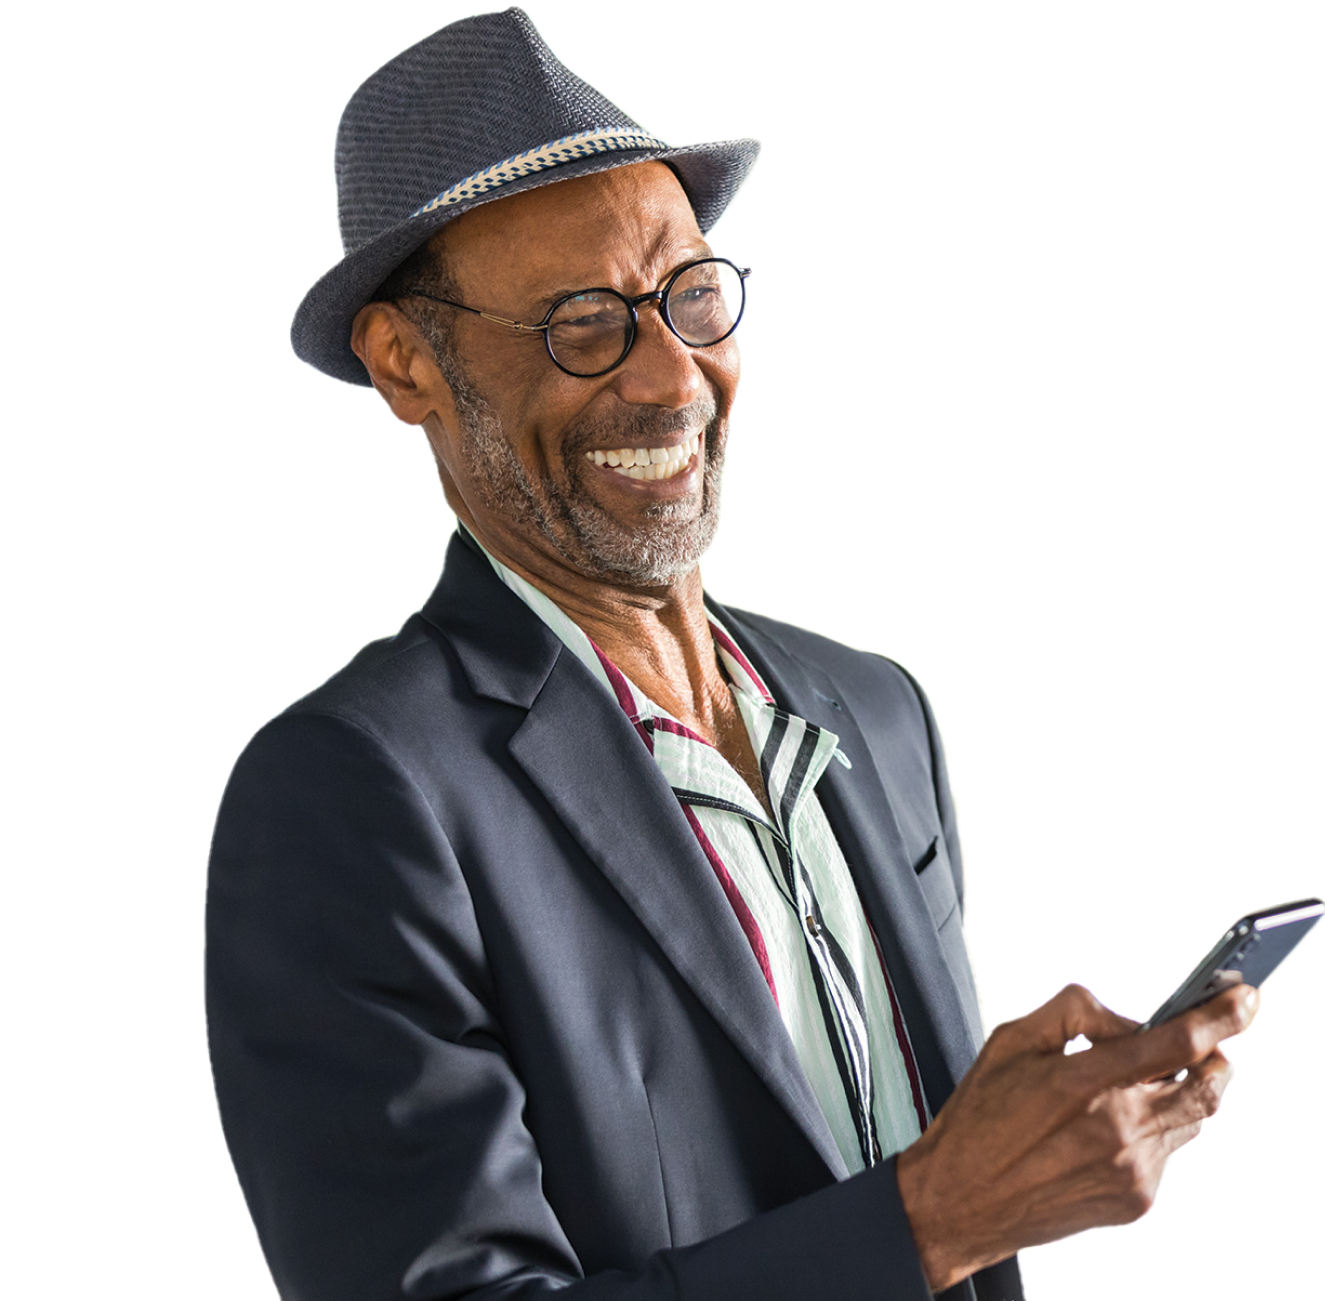 Man with glasses in suit and fedora laughing looking at mobile phone